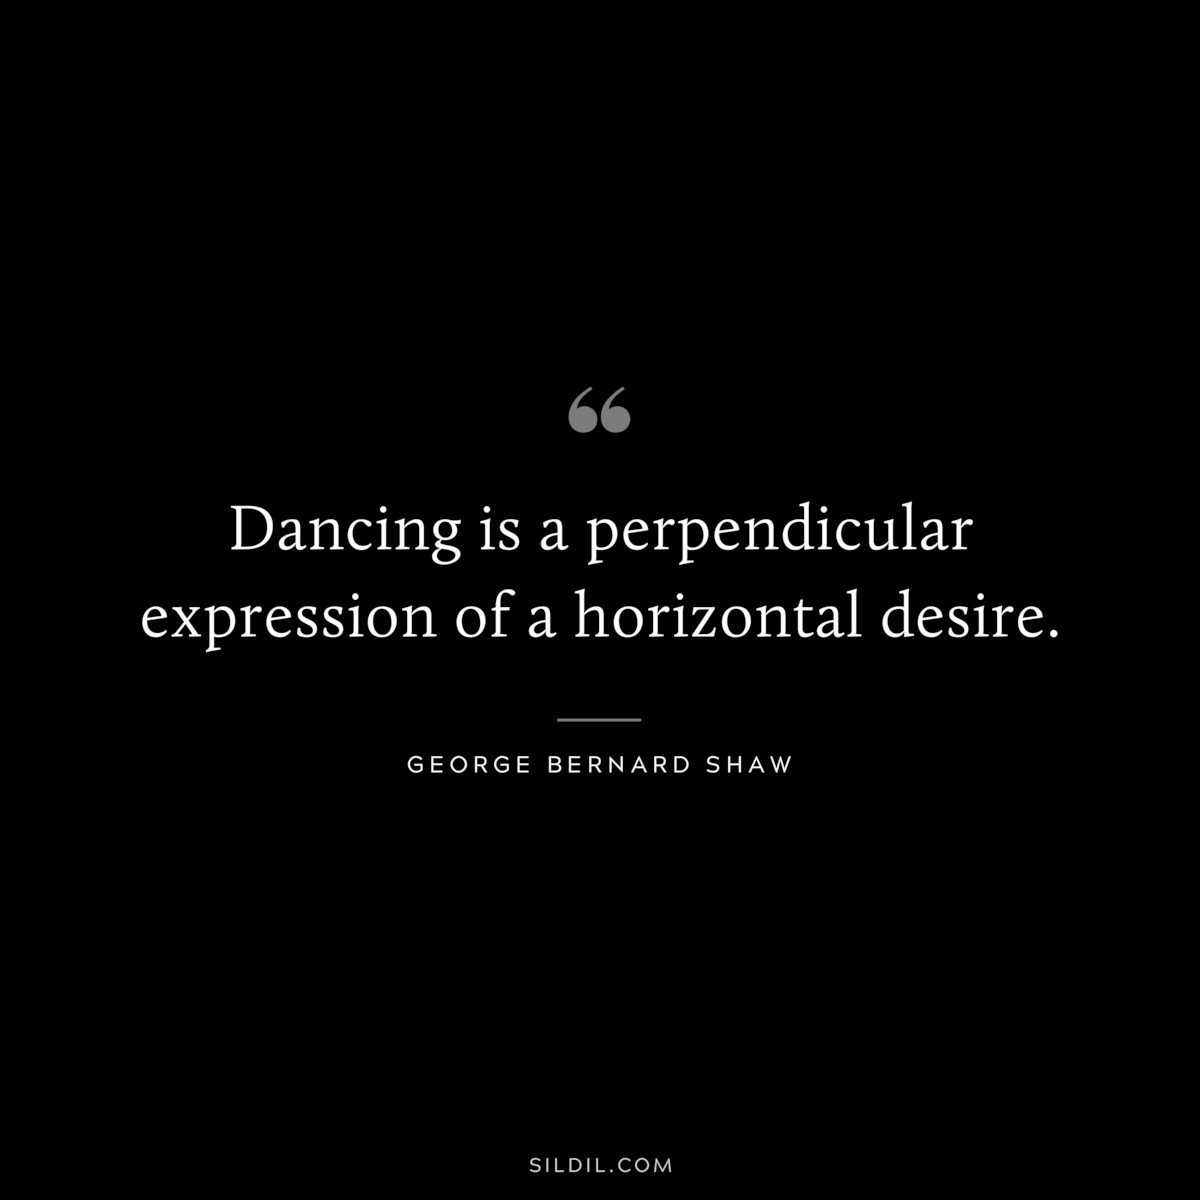 Dancing is a perpendicular expression of a horizontal desire. ― George Bernard Shaw